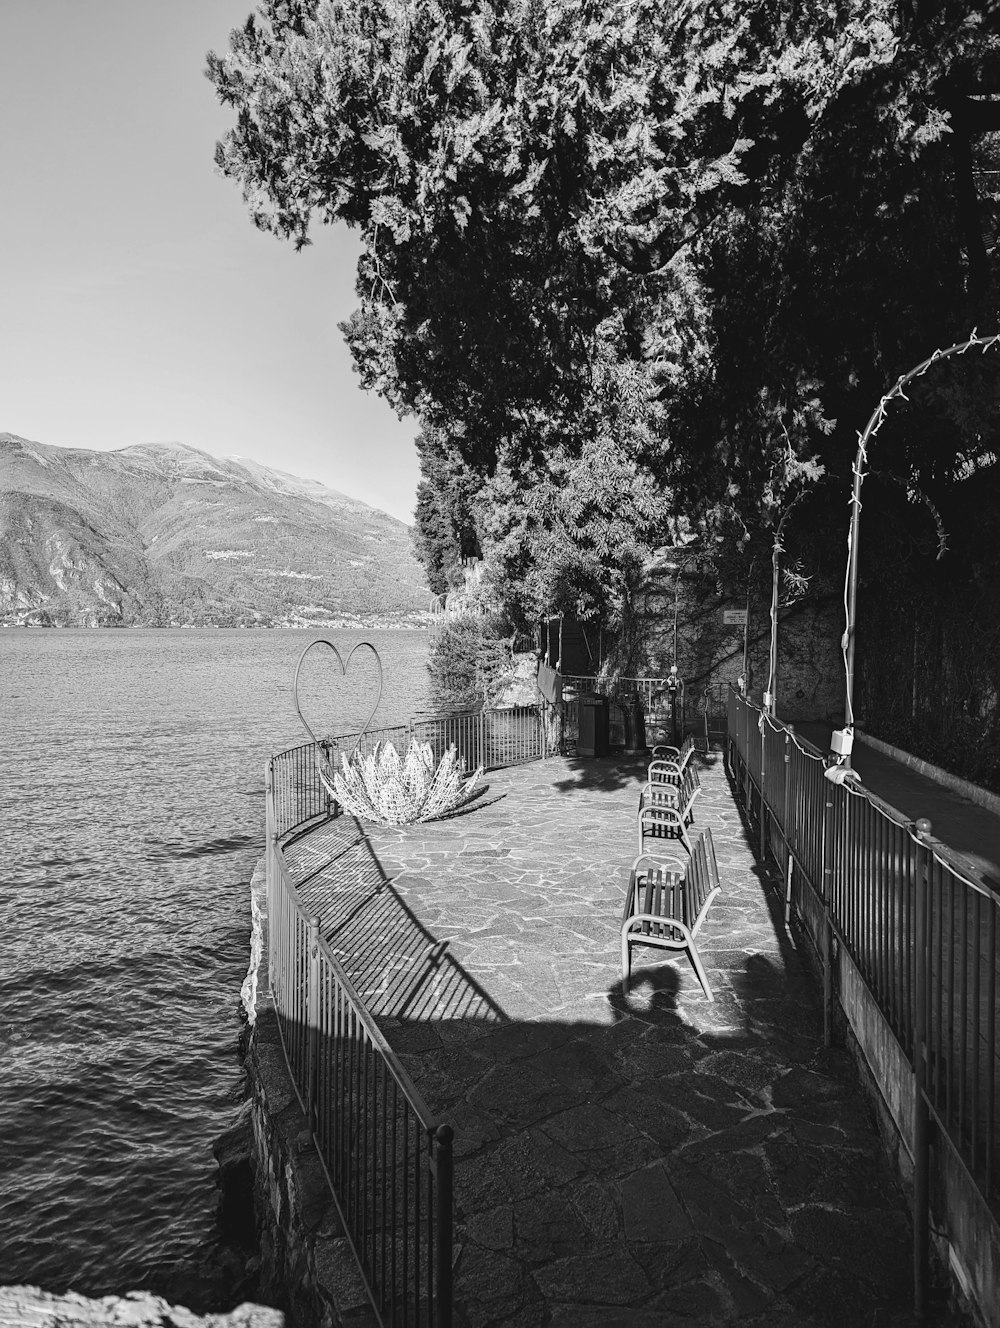 a black and white photo of benches on the side of a lake